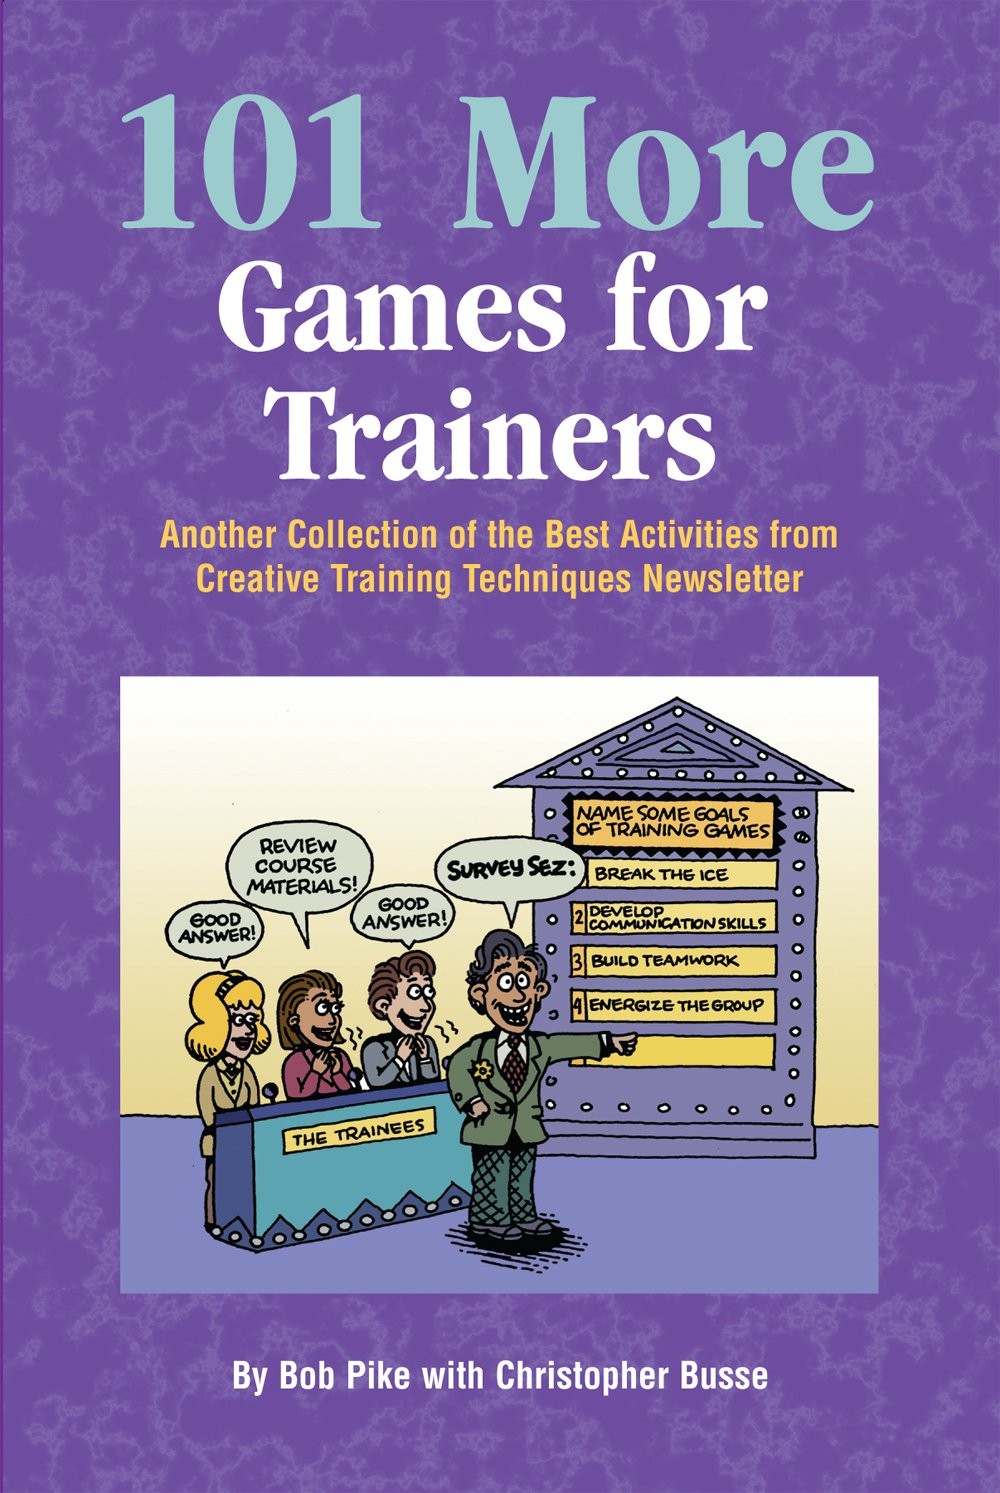 101 More Games for Trainers: Another Collection of the Best Activities From Creative Training Techniques Newsletter